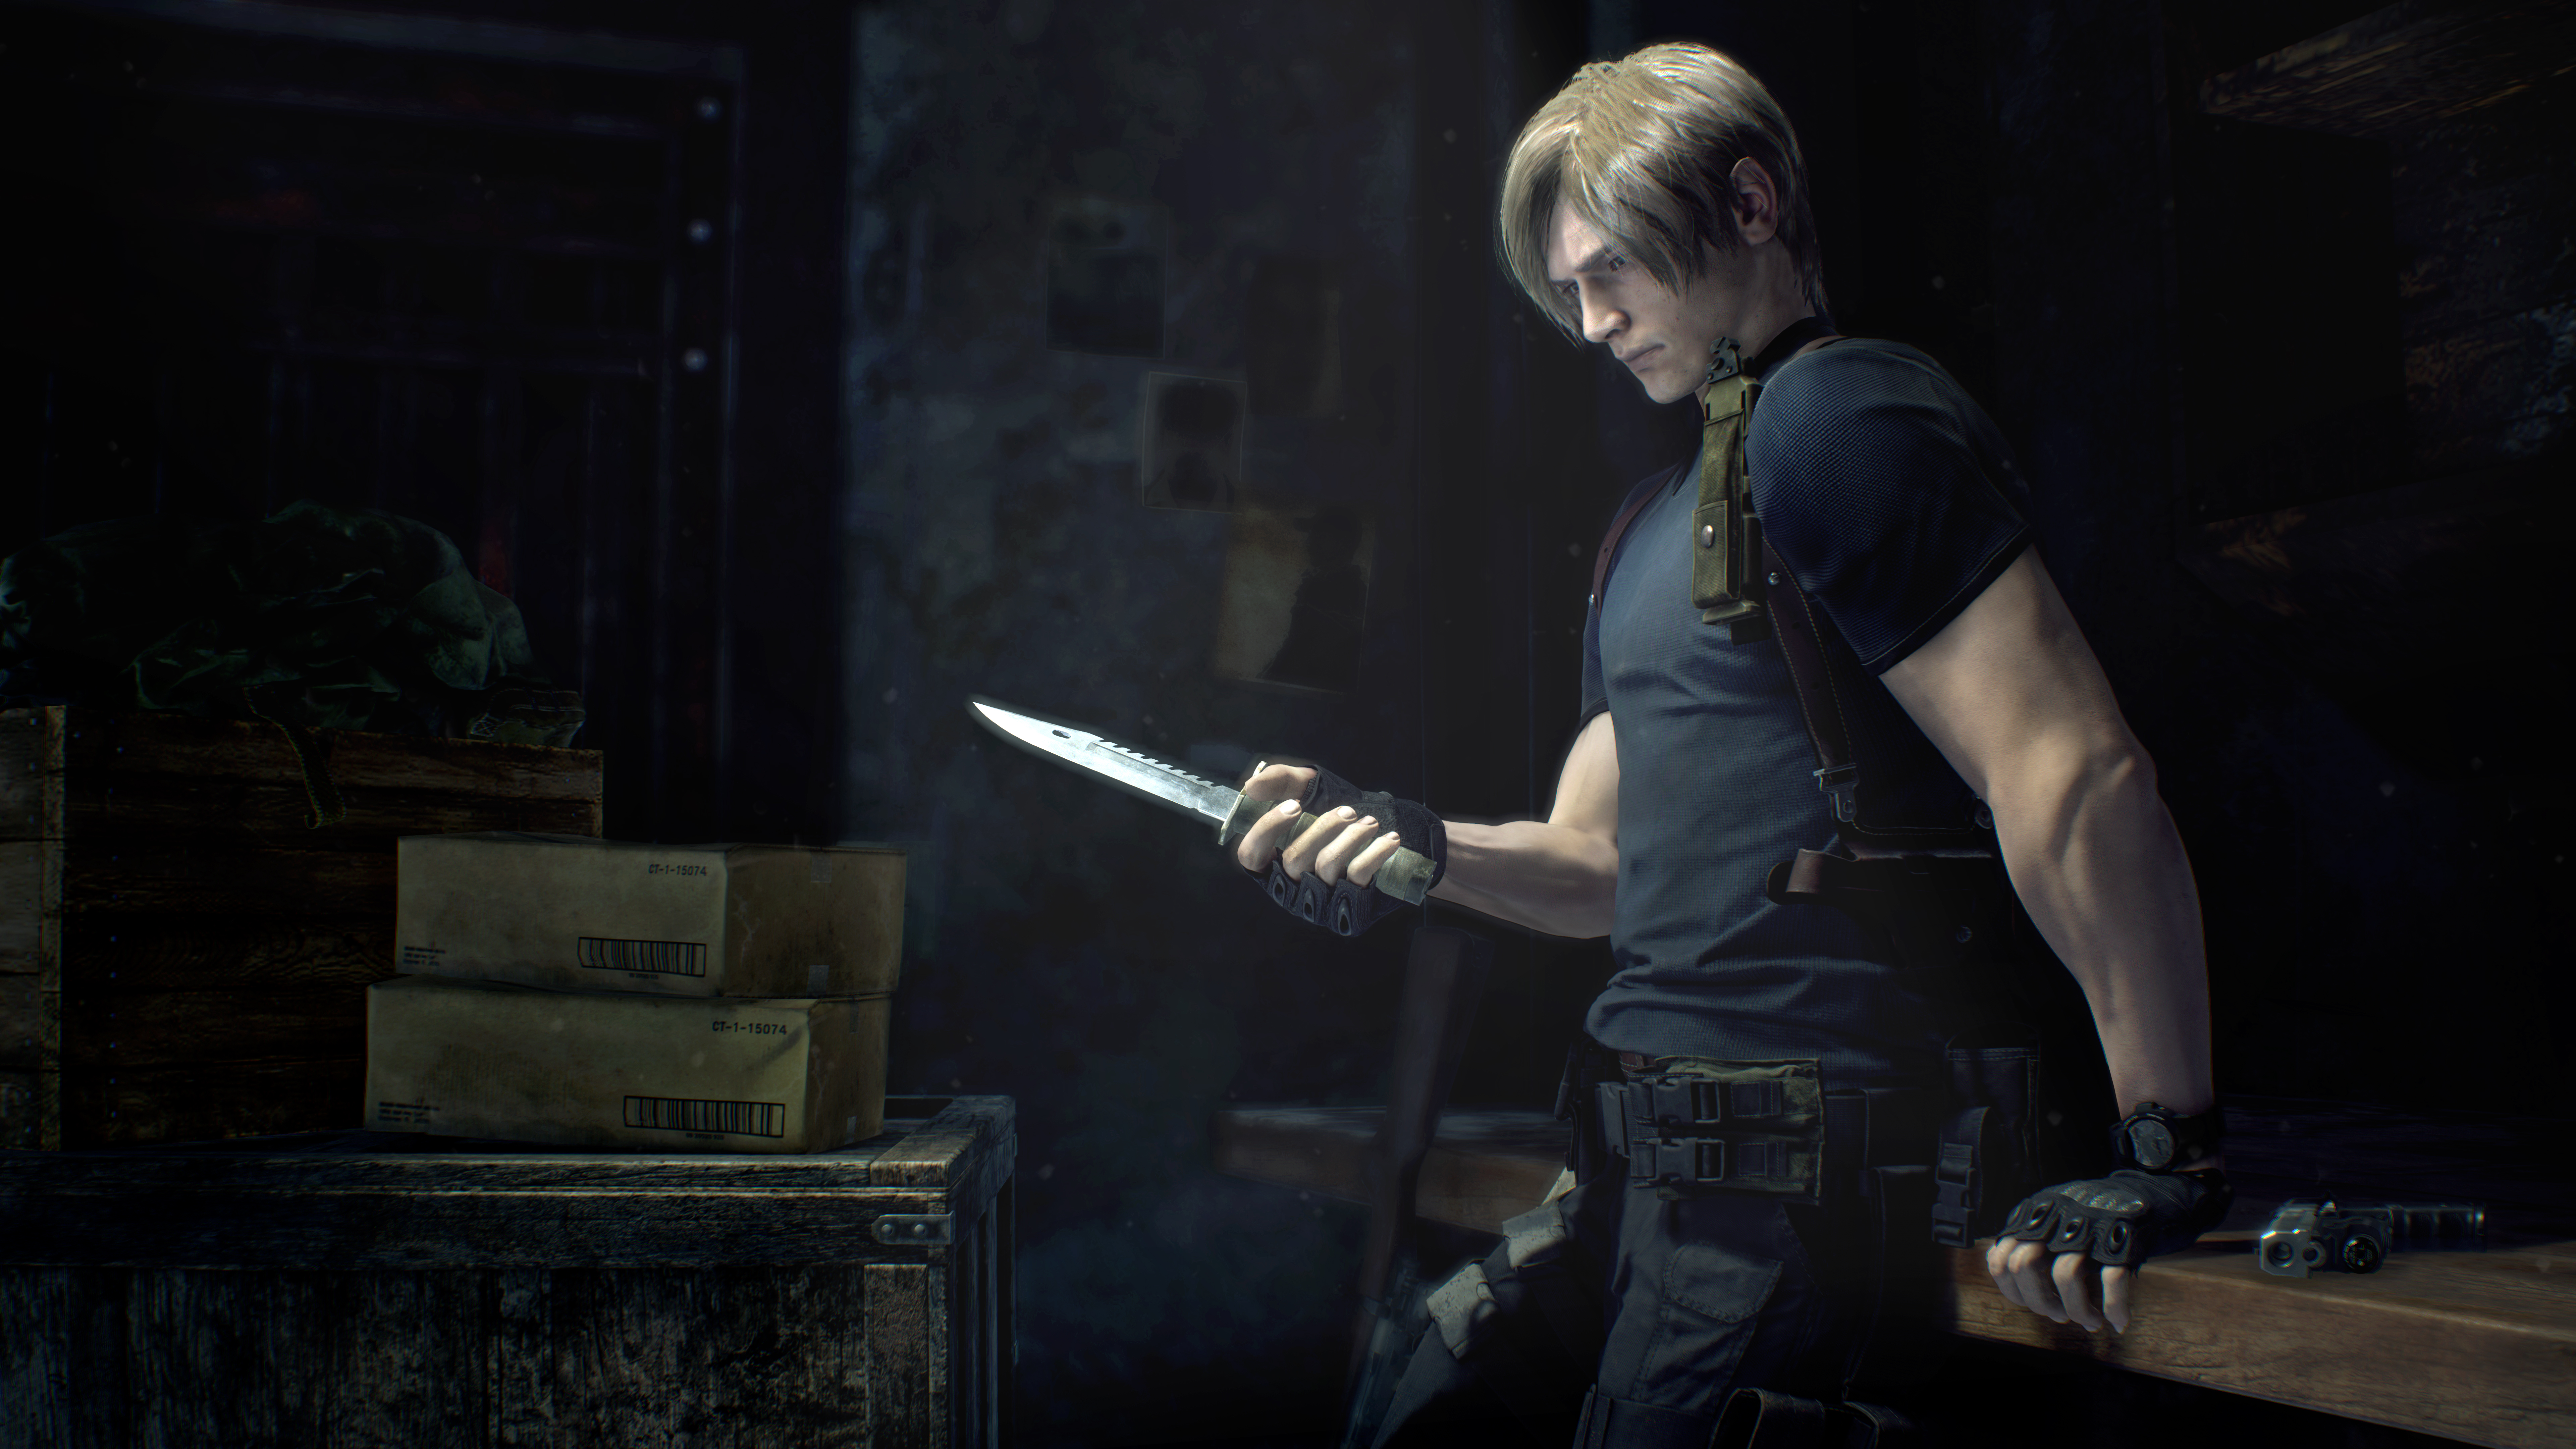 Wallpaper  resident evil 4 remake Resident Evil Leon S Kennedy just  game 4Gamers Gamer Gaming Series video games 1920x1080  qianyijun   2235144  HD Wallpapers  WallHere